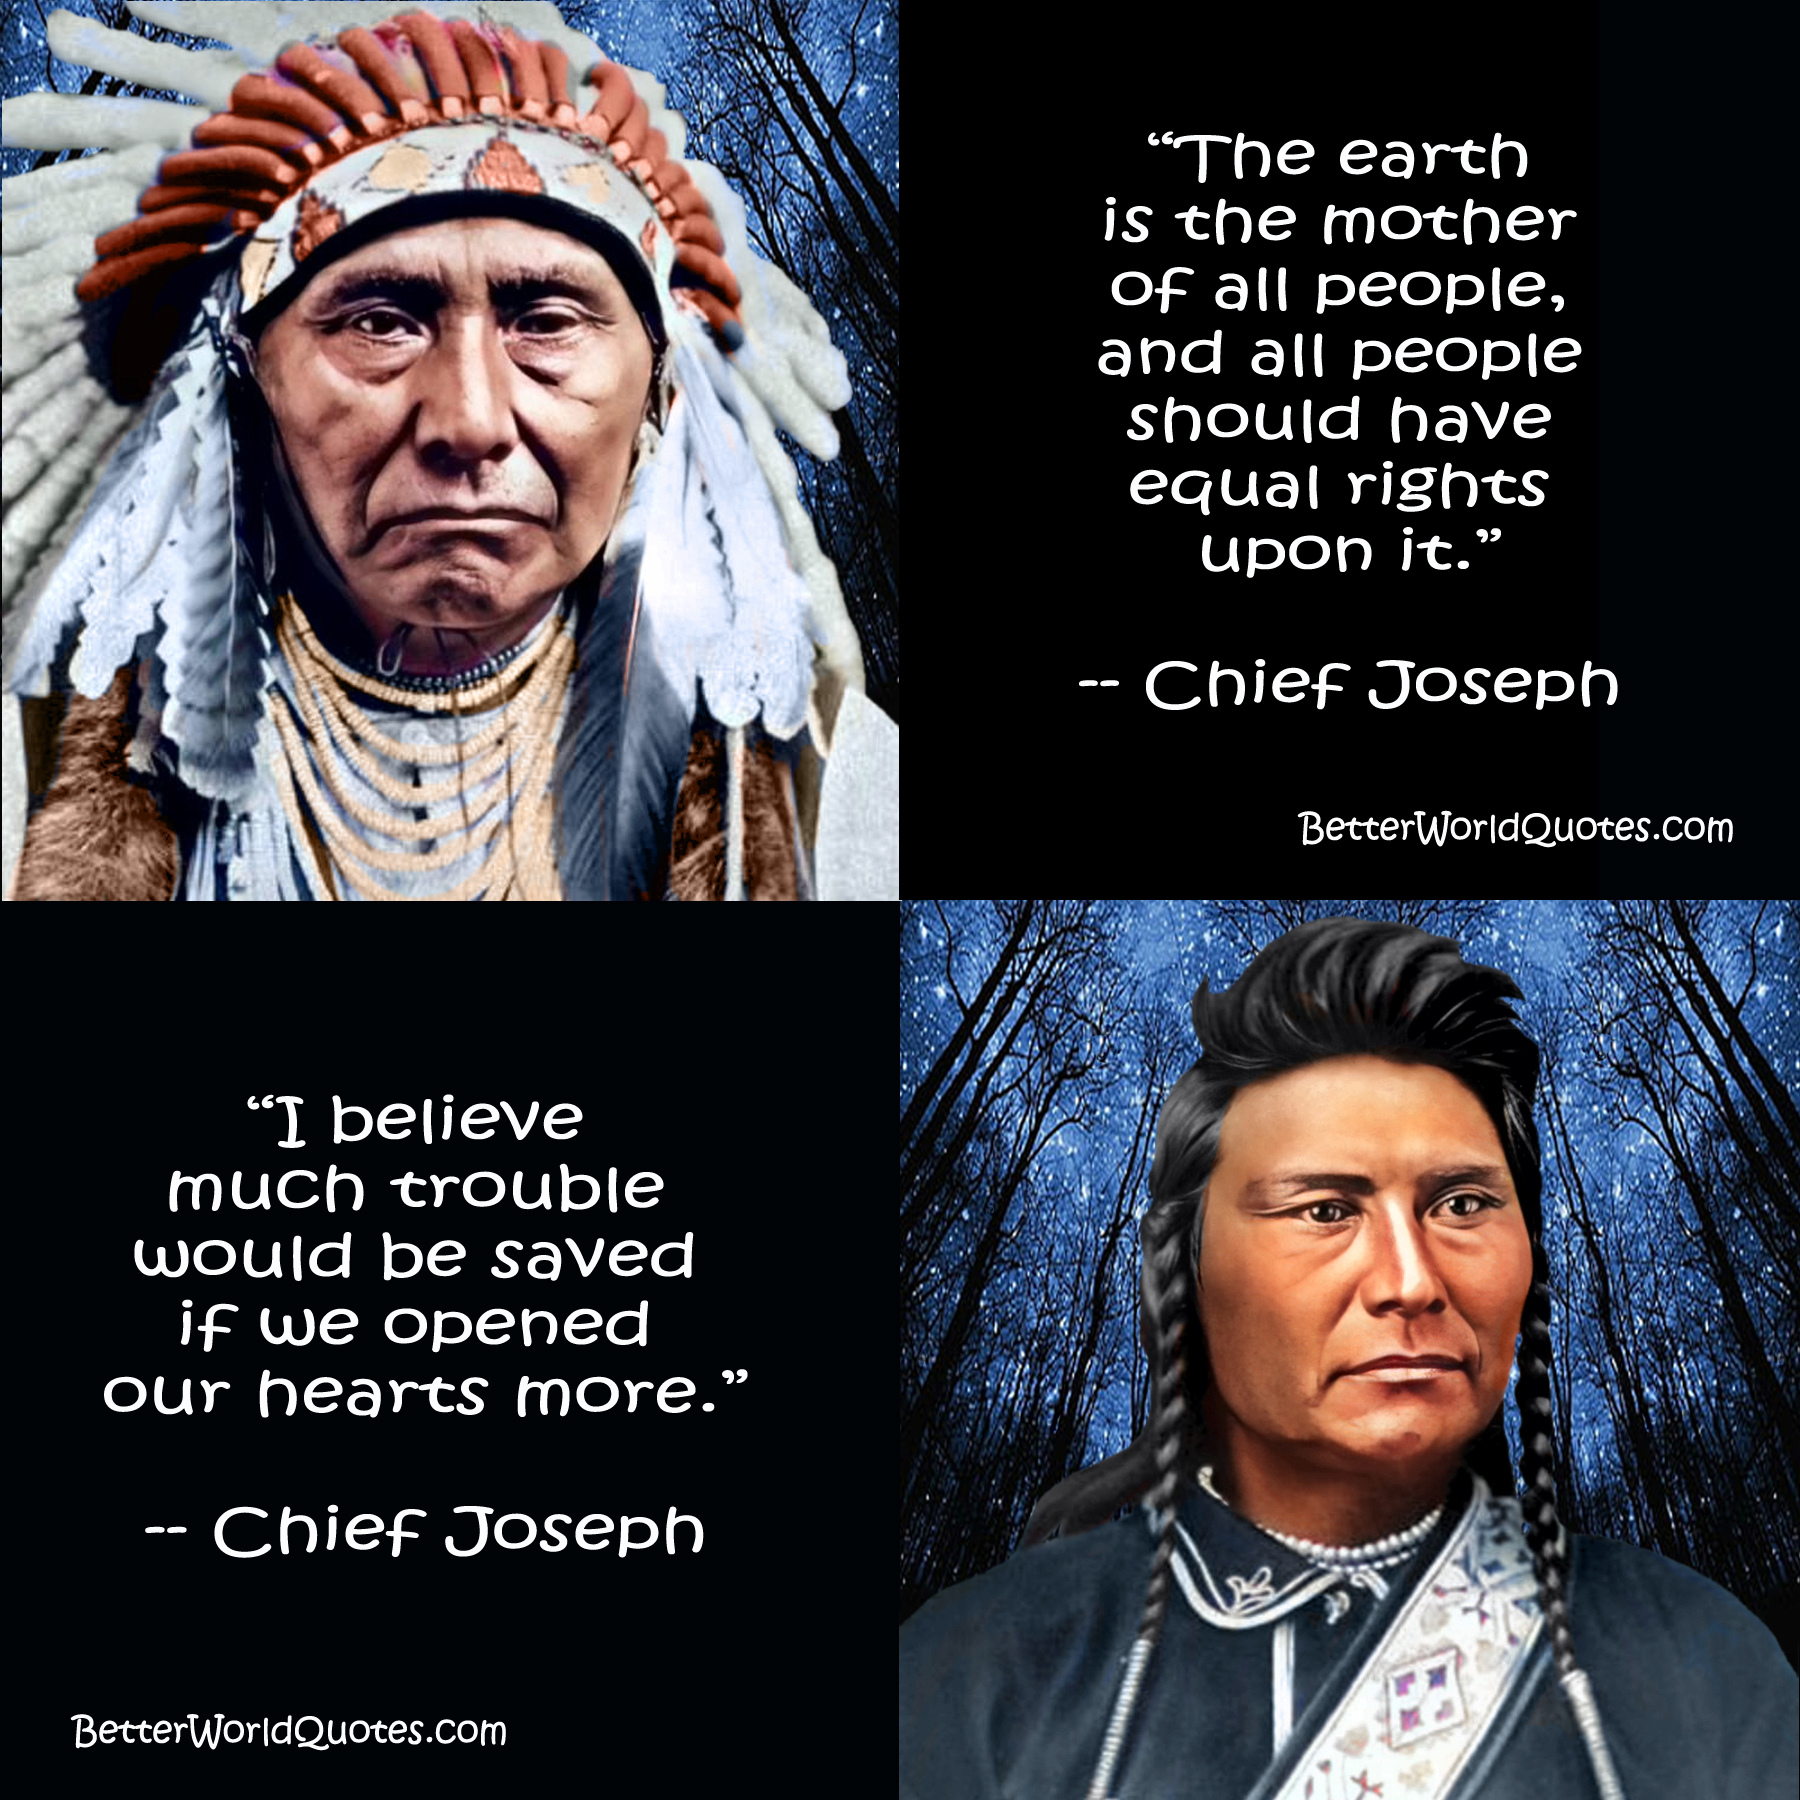 Chief Joseph: I believe much trouble would be saved if we opened our hearts more.